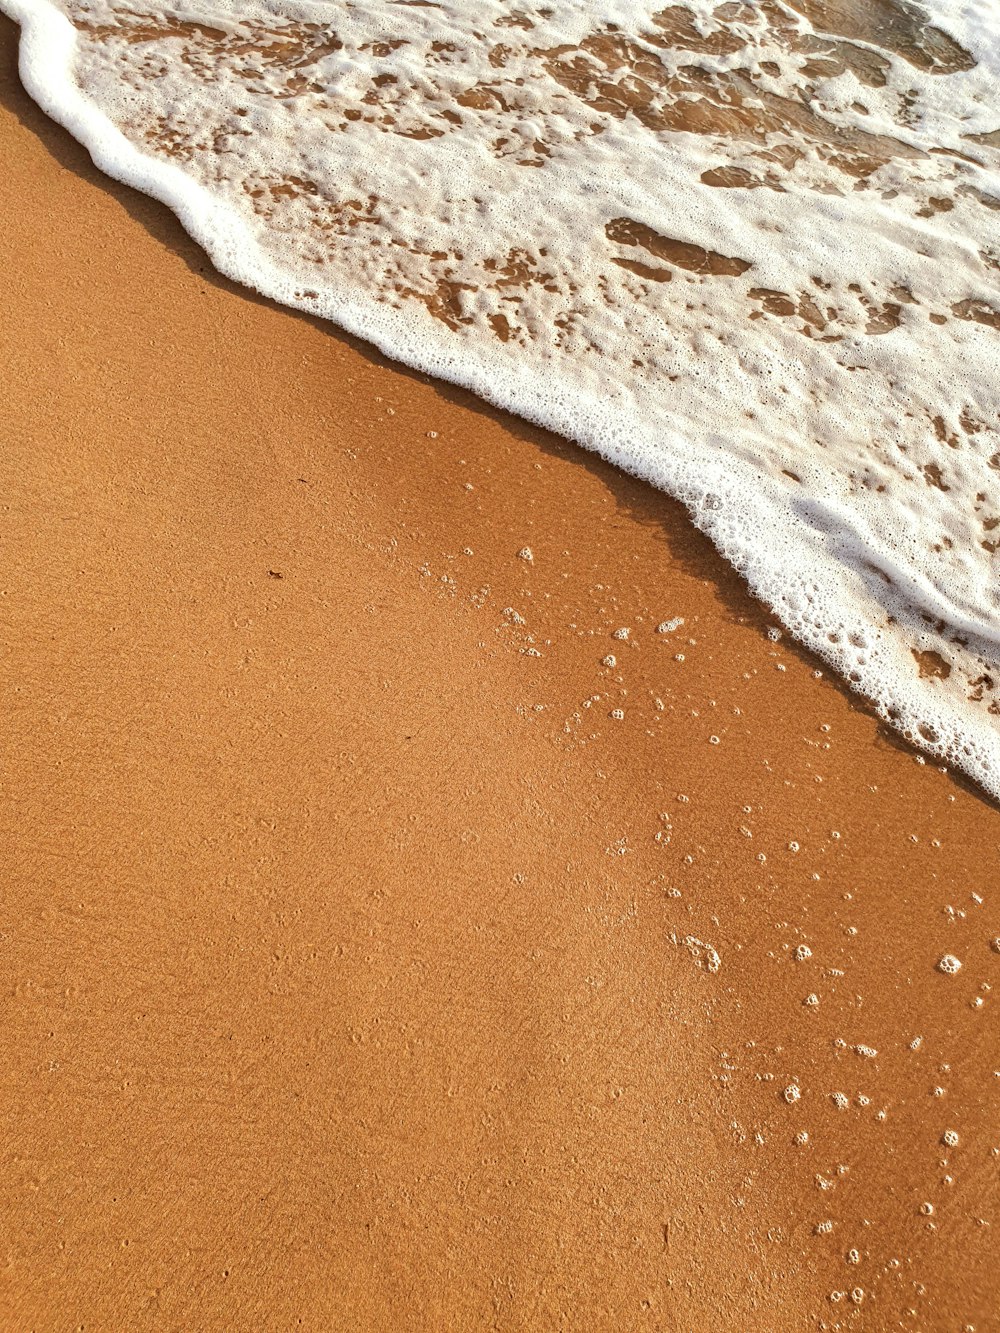 brown sand beside body of water during daytime